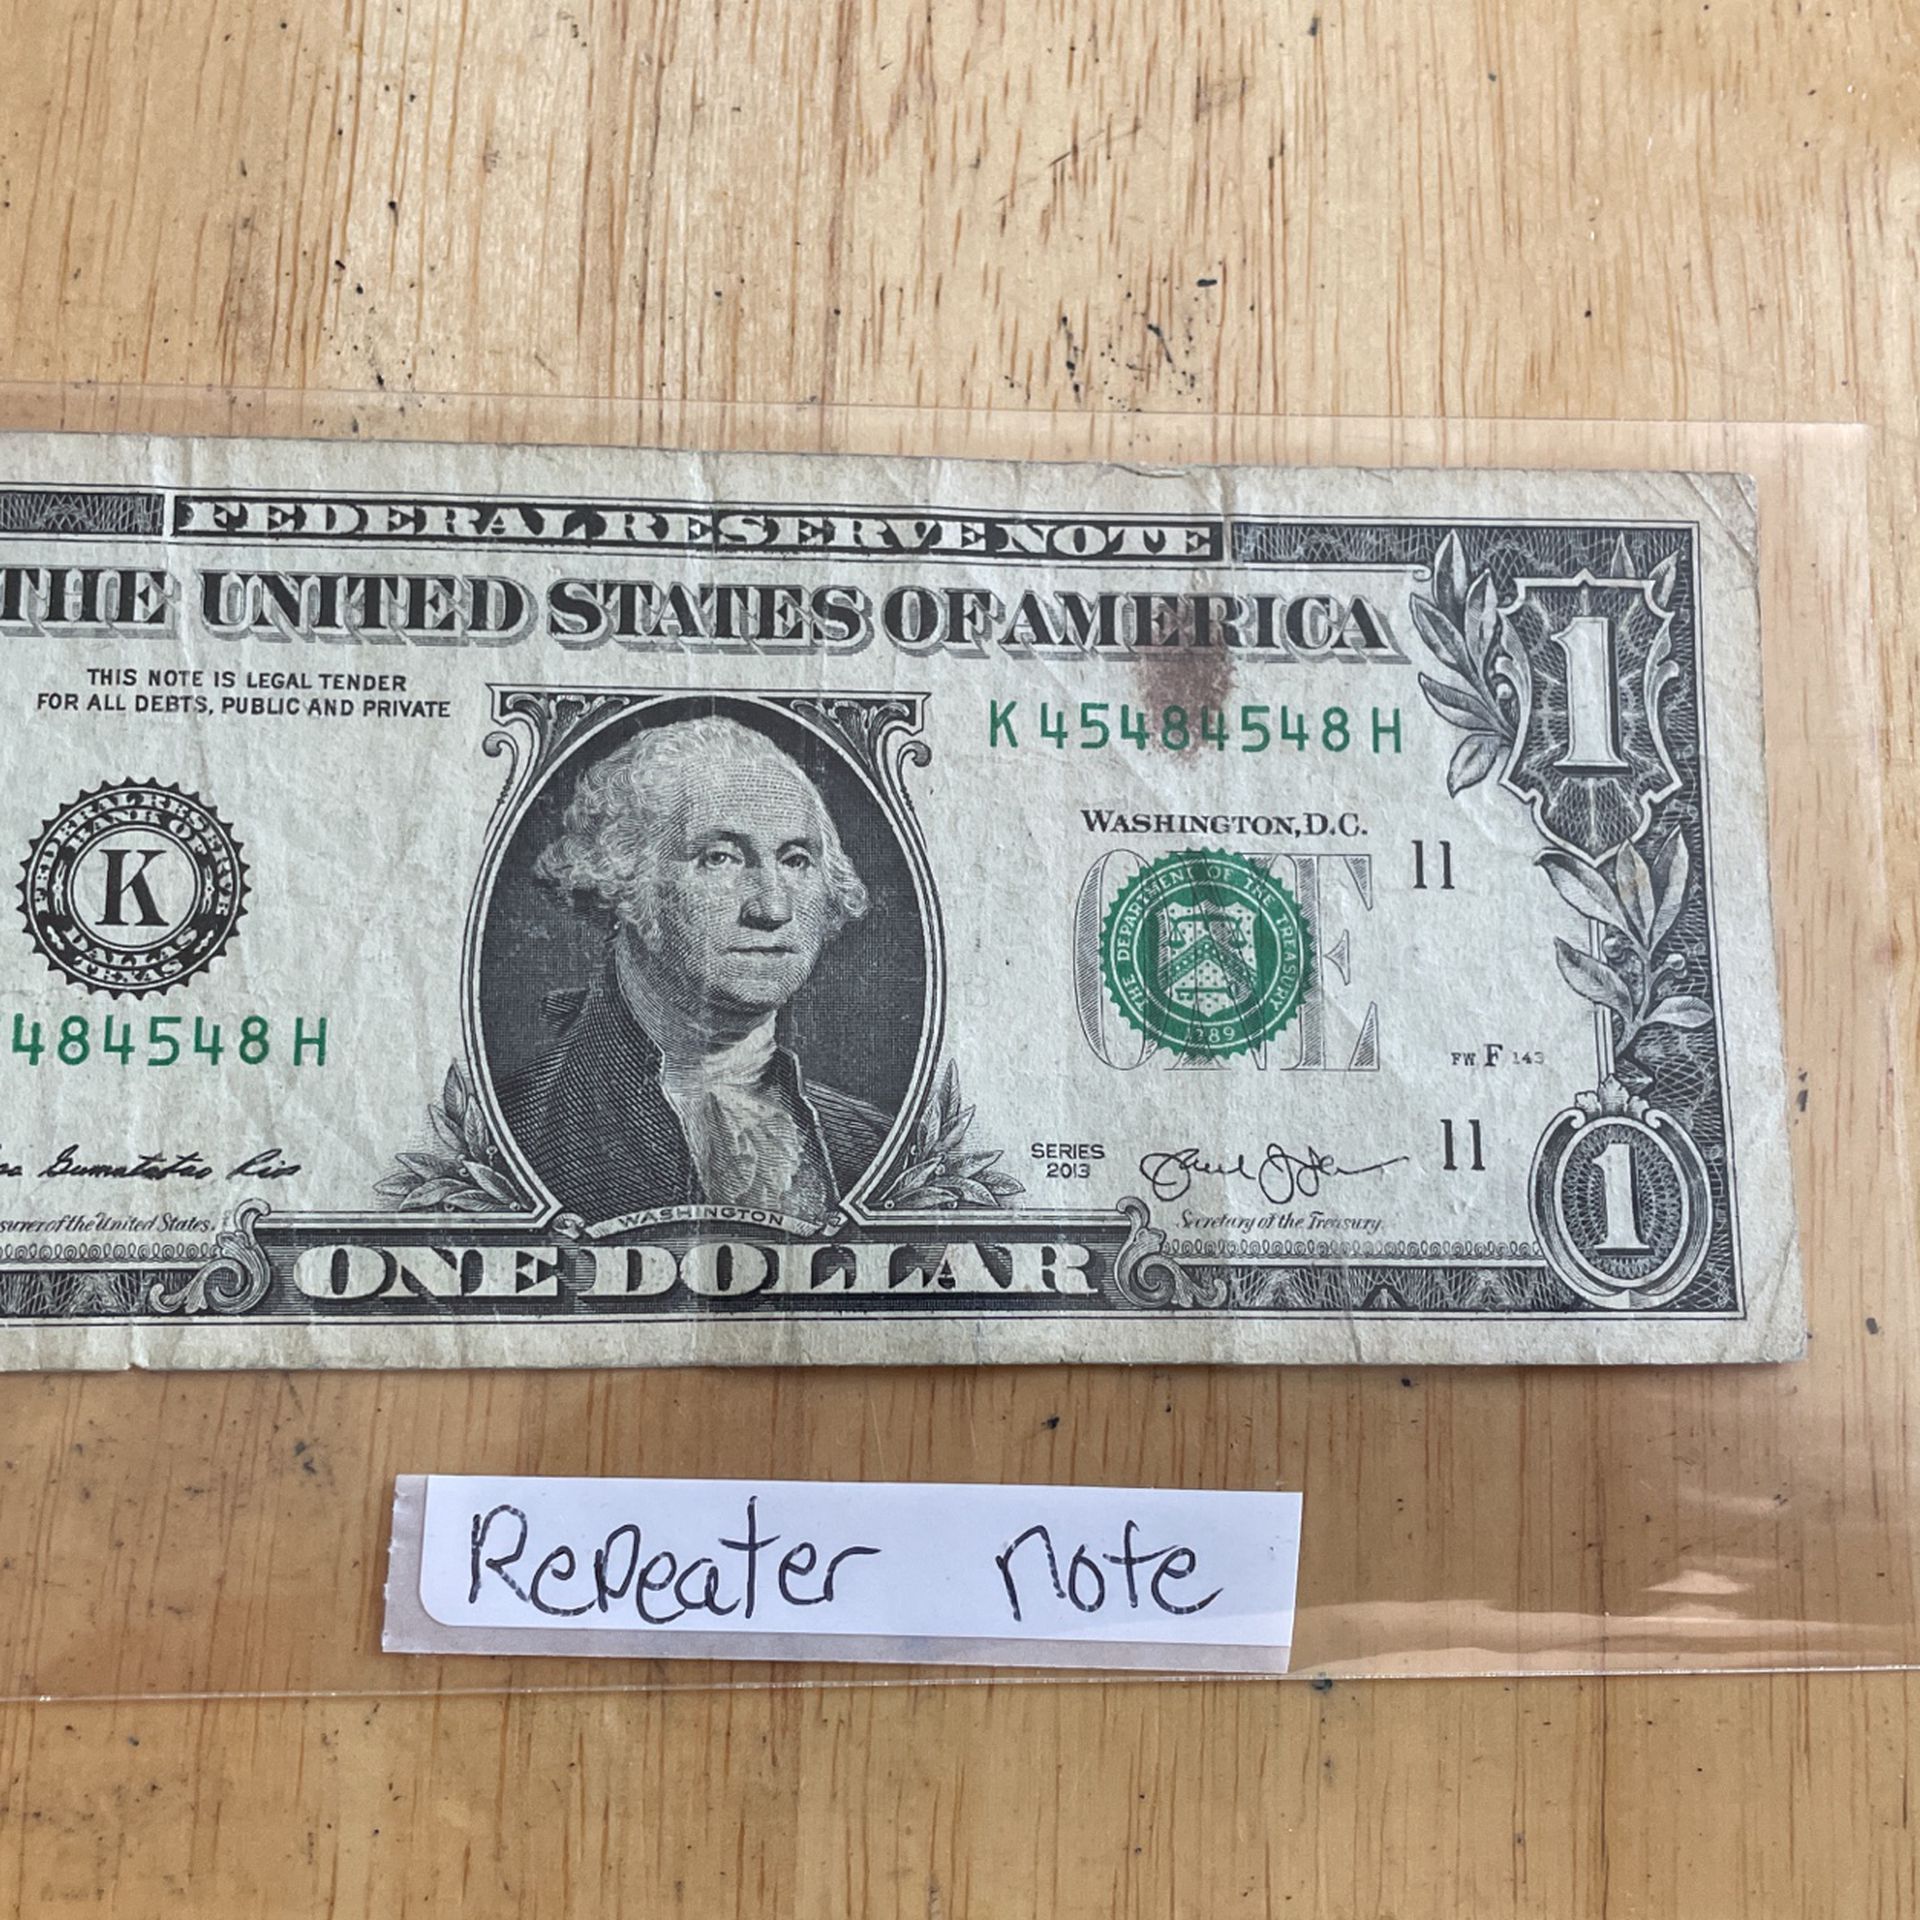 Repeater Note